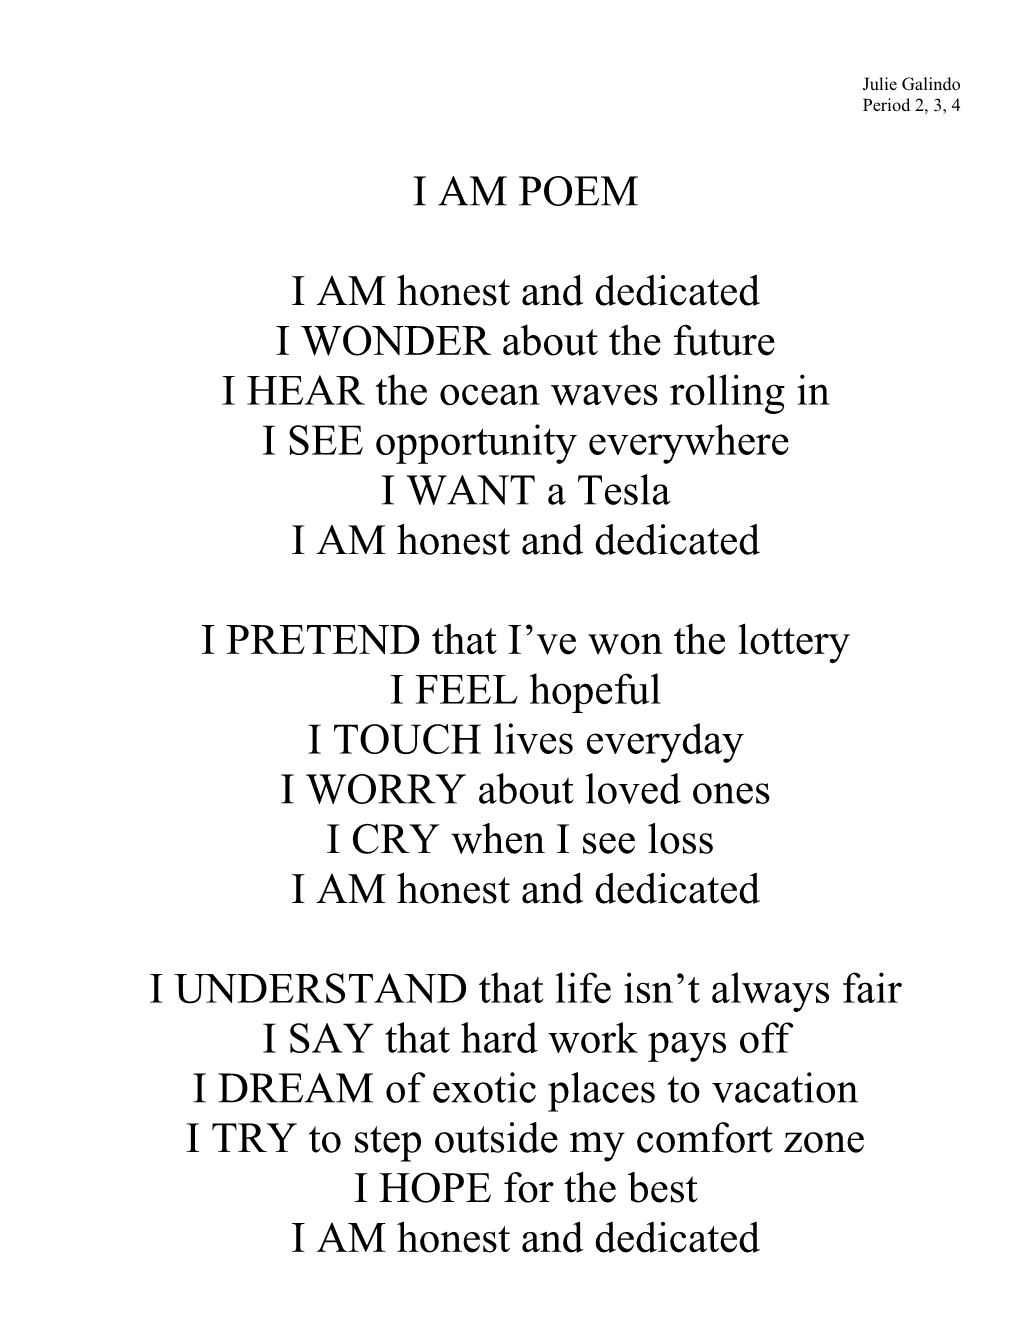 Complete the Following Poem on White Printer Paper